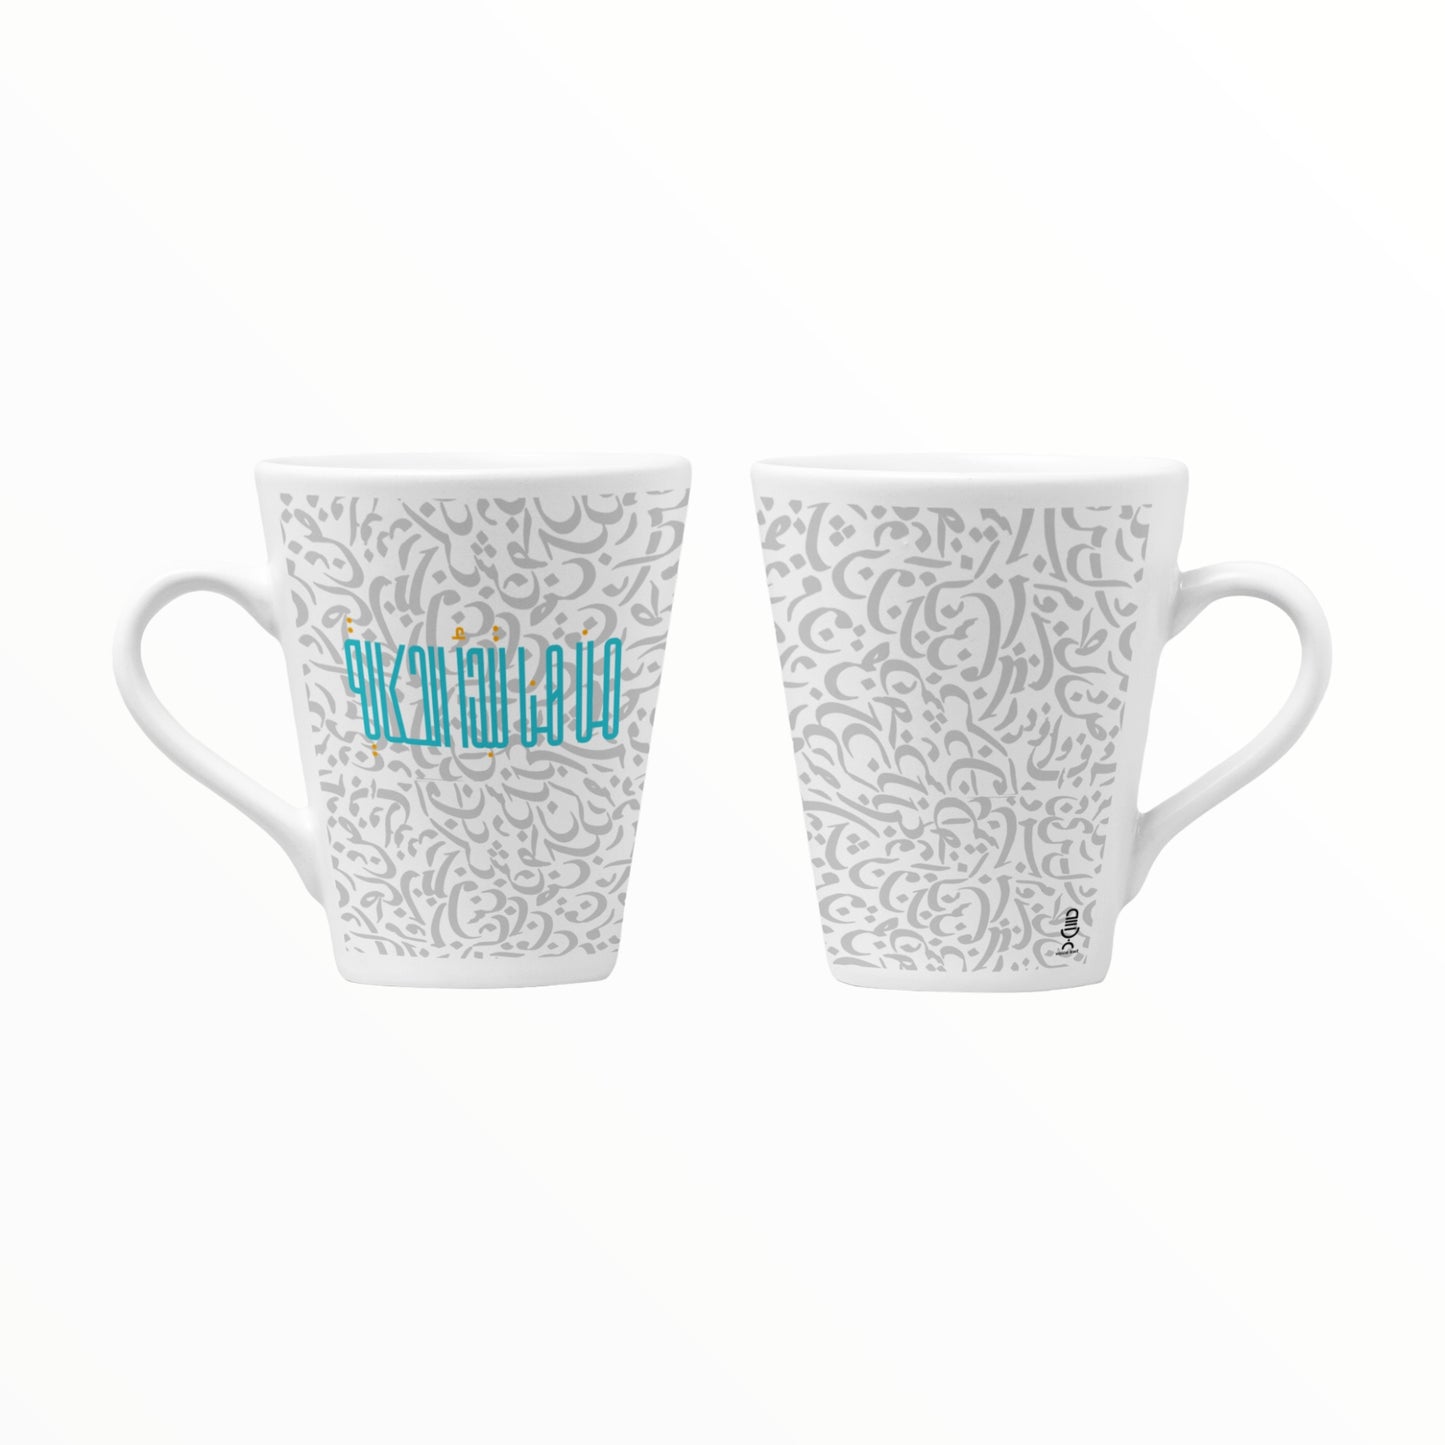 Mugs with Voice famous quote